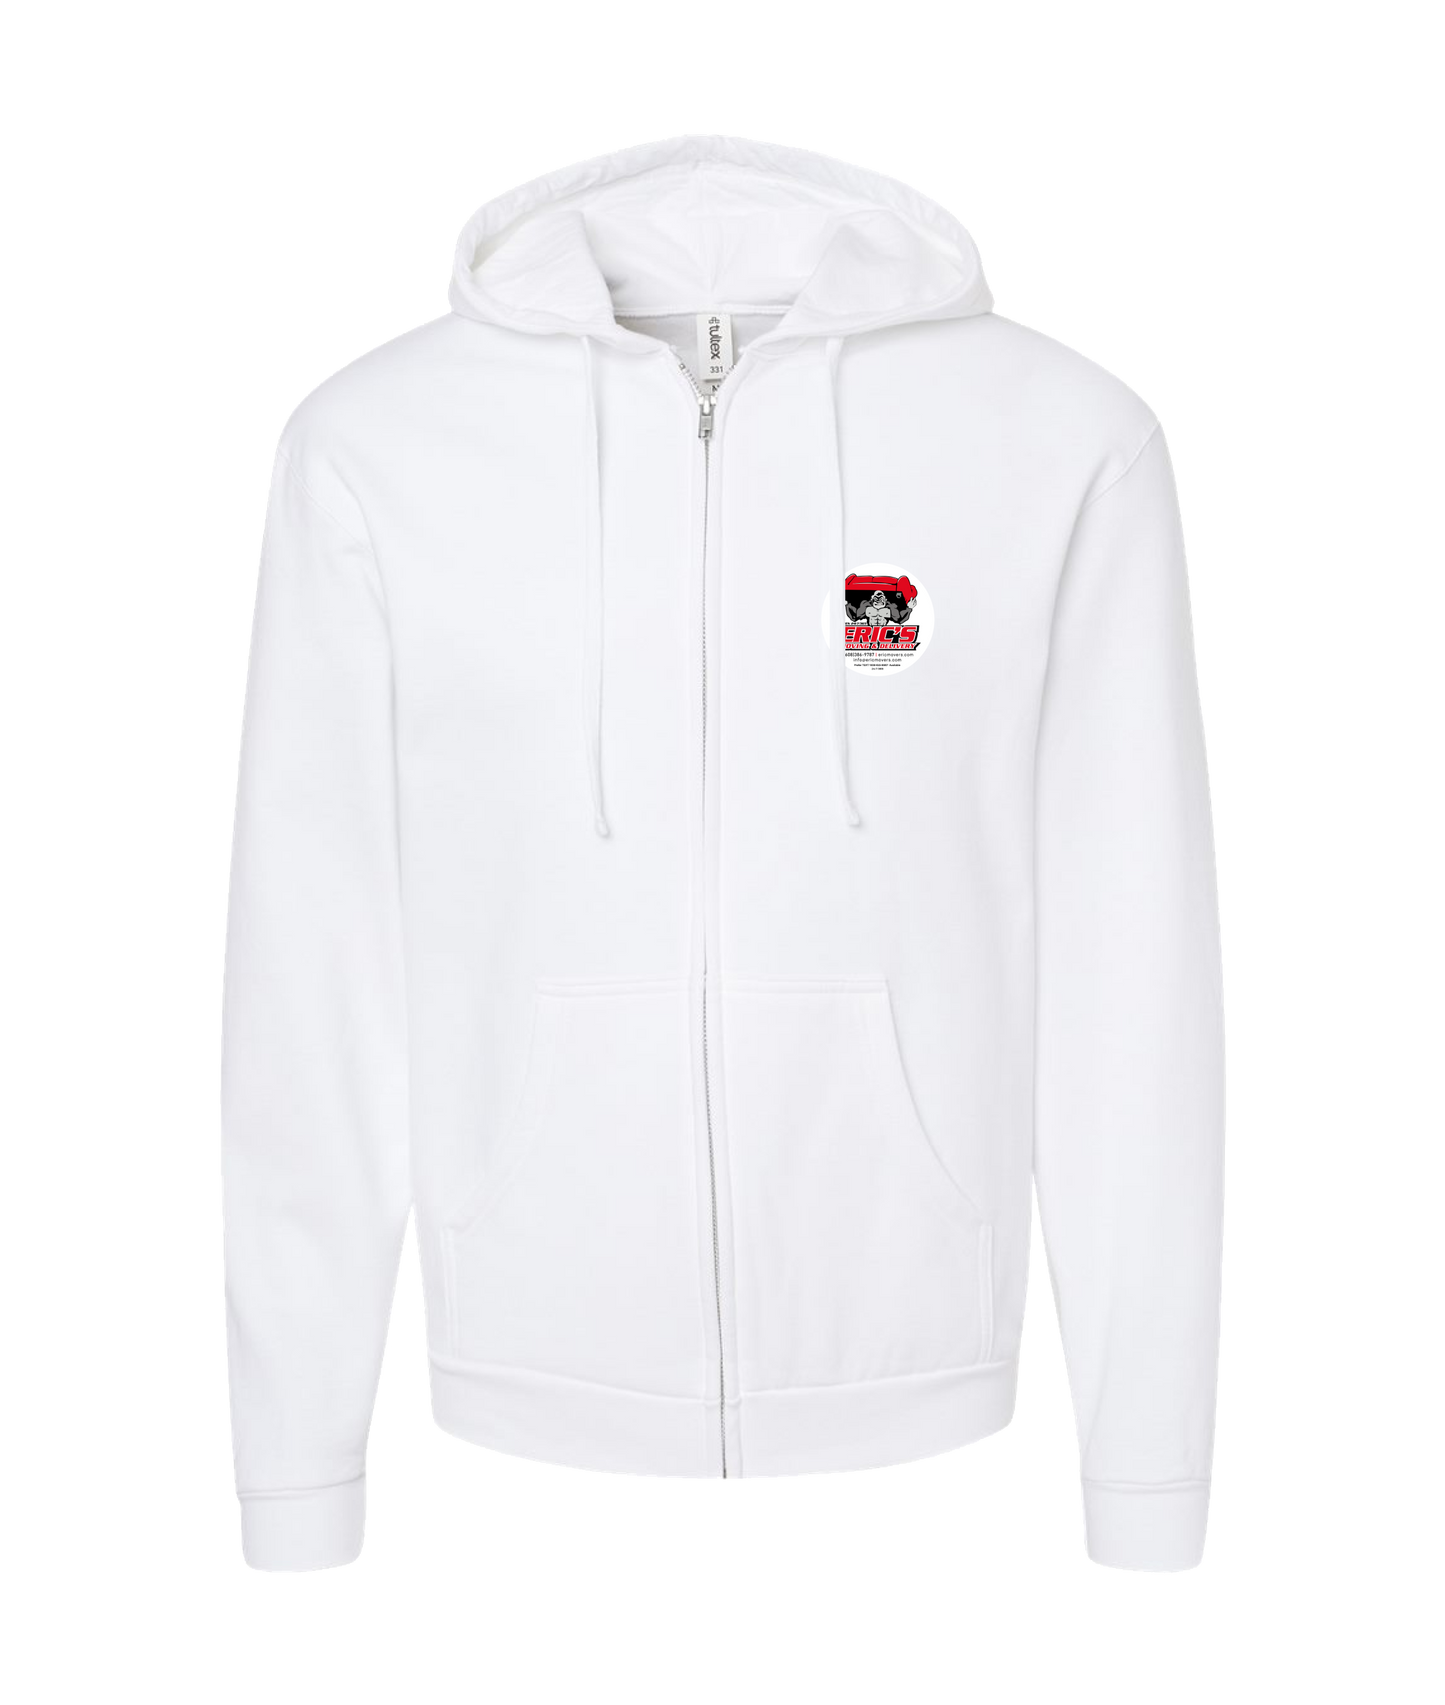 Eric's Movers - Couch Lift - White Zip Up Hoodie